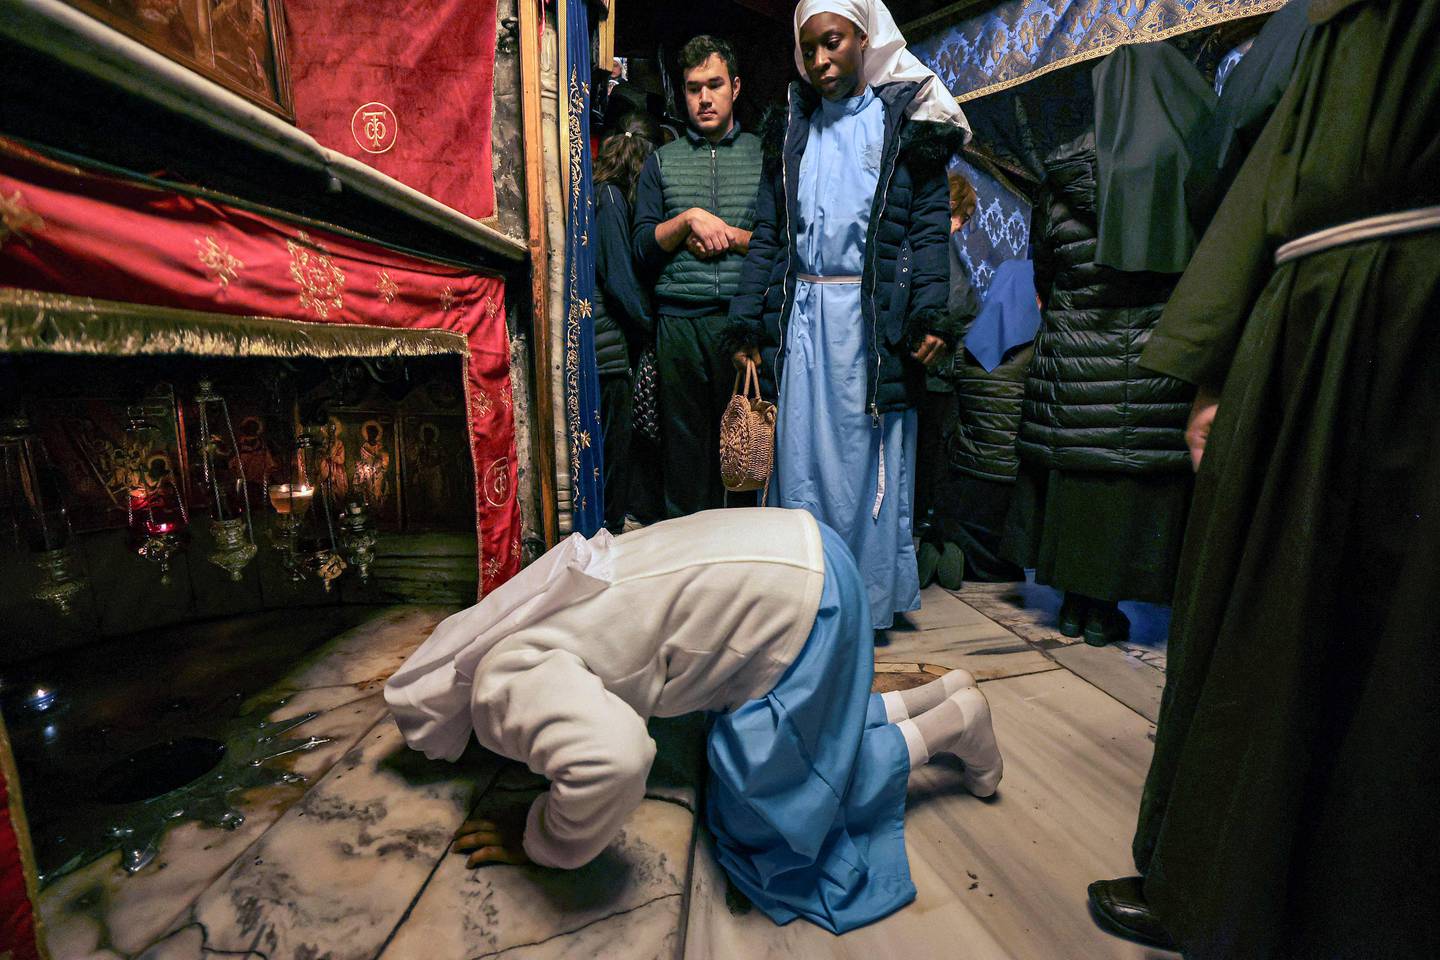 A pilgrim prostrates in prayer before the grotto, believed to be the site of the birth of Jesus, at the crypt of the Church of the Nativity in Bethlehem in the occupied West Bank on Christmas Day on December 25.  AFP